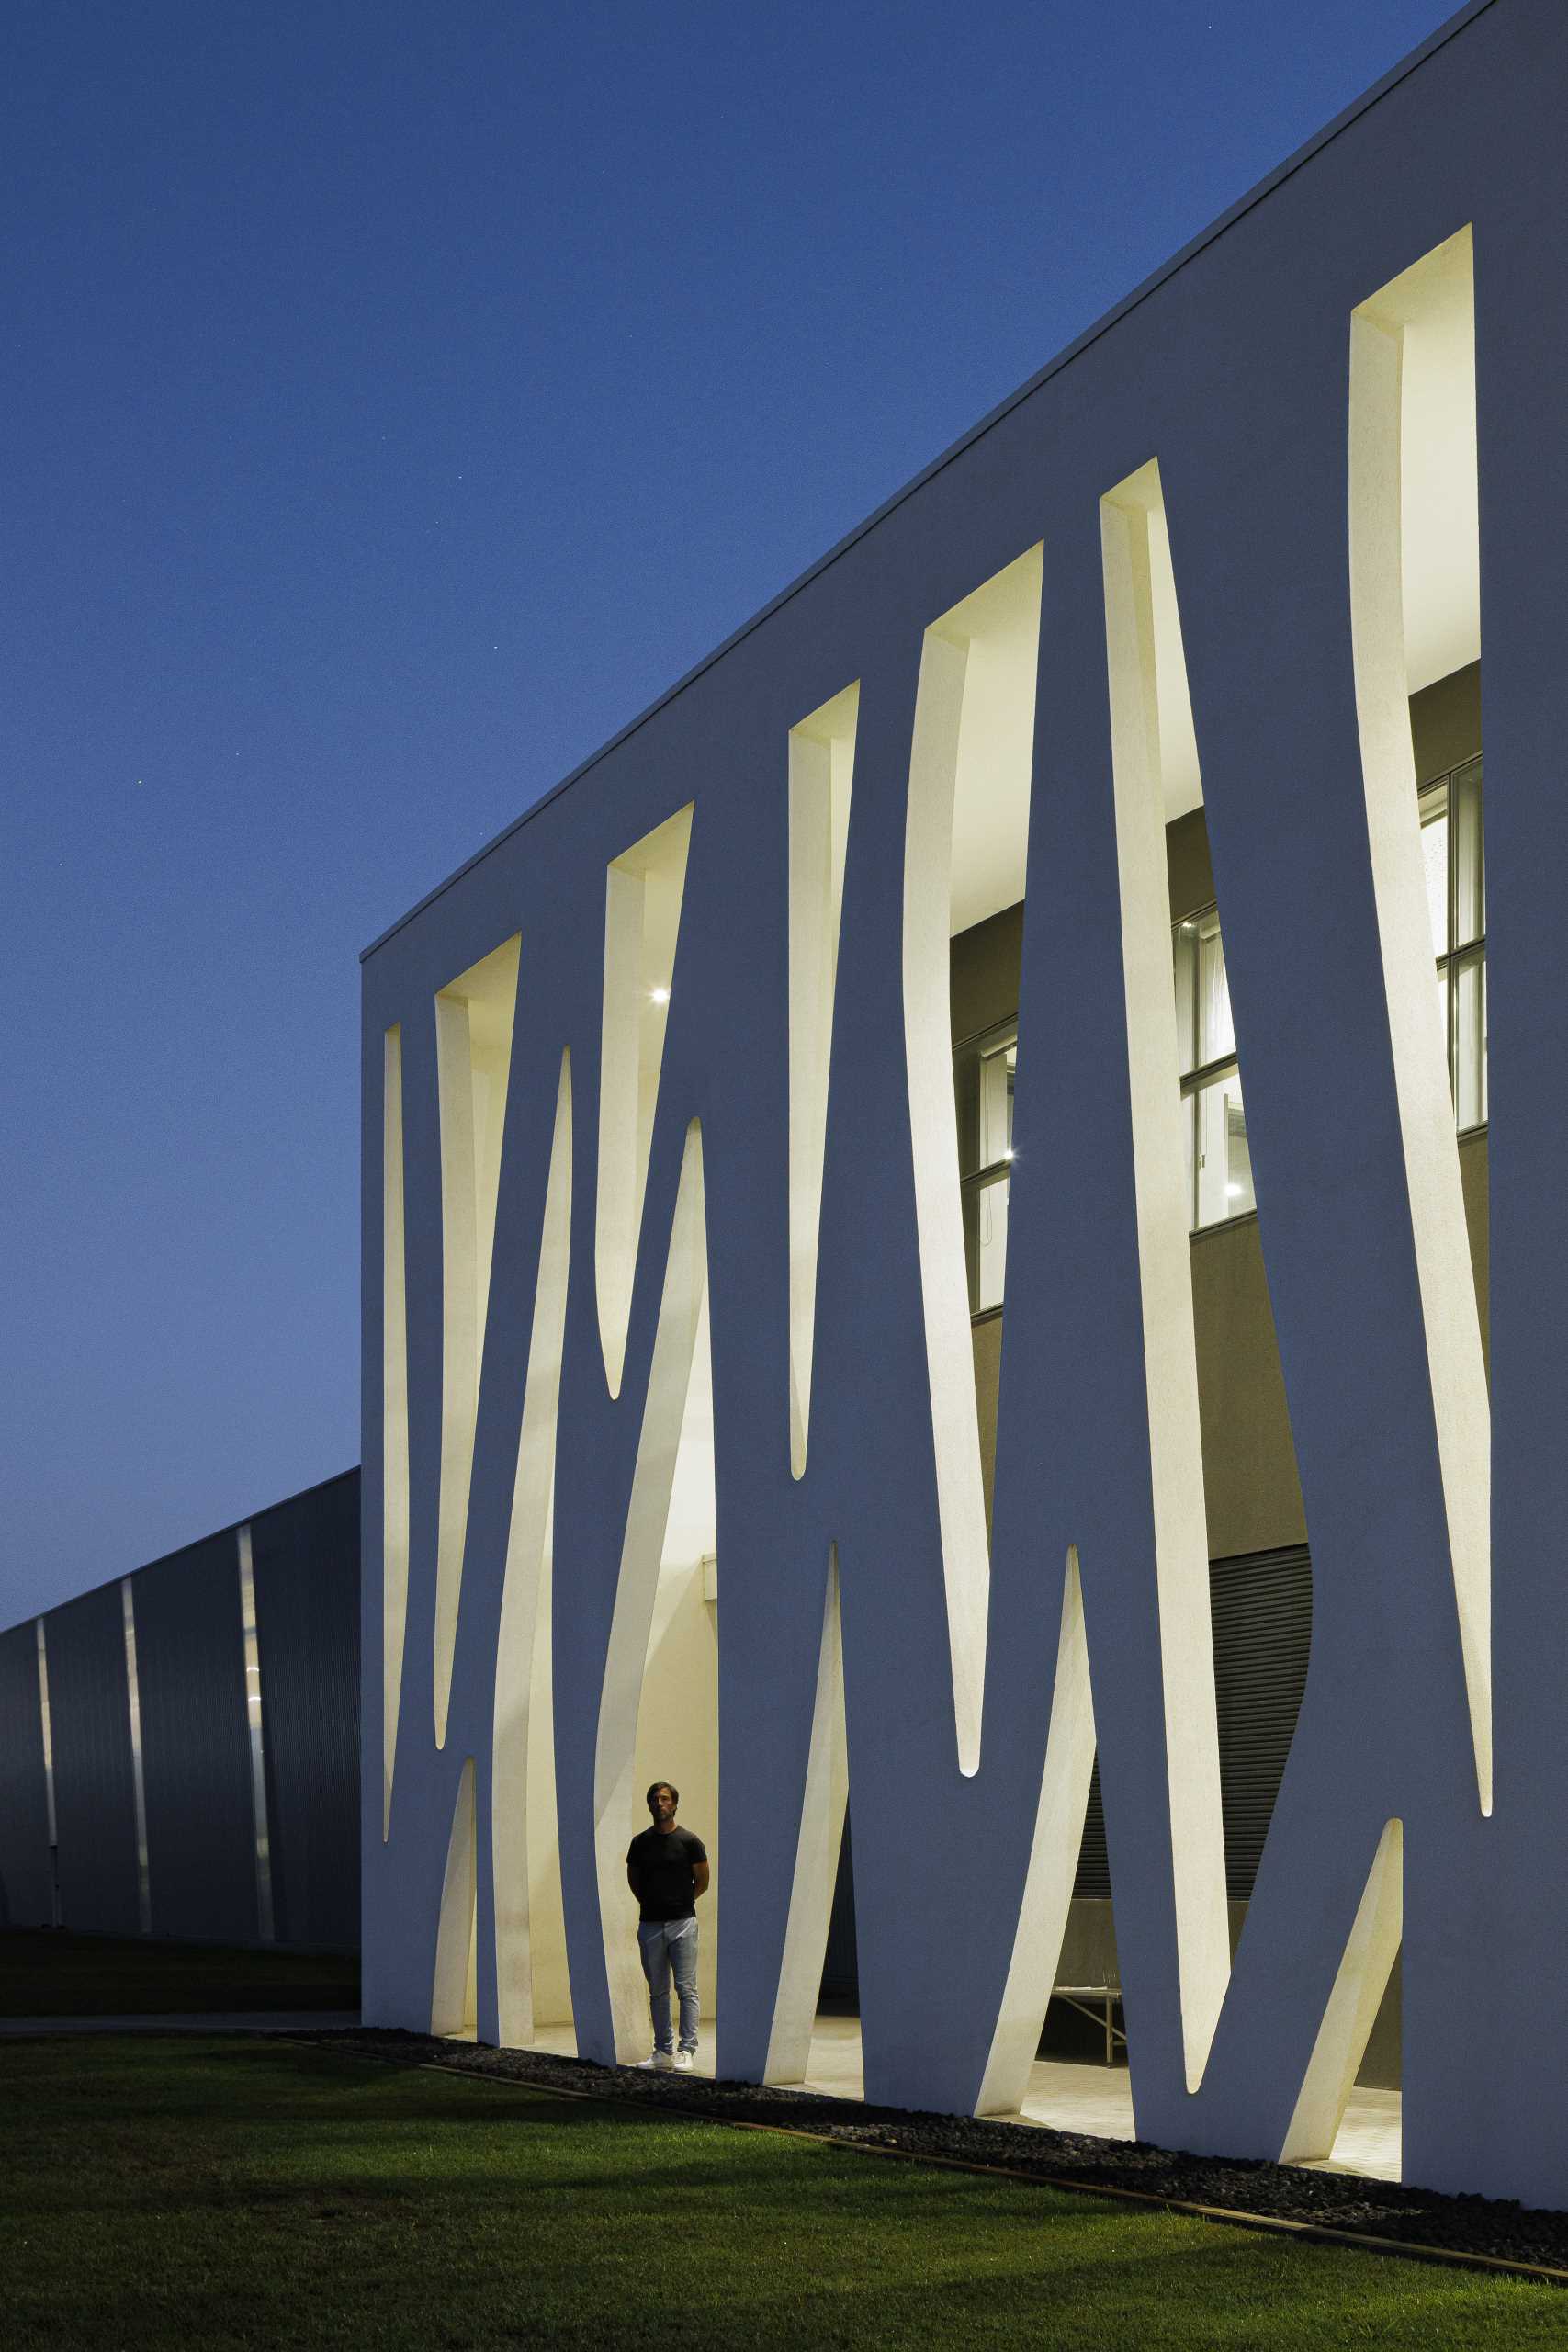 An artistic building facade inspired by the structure found in baking dough.